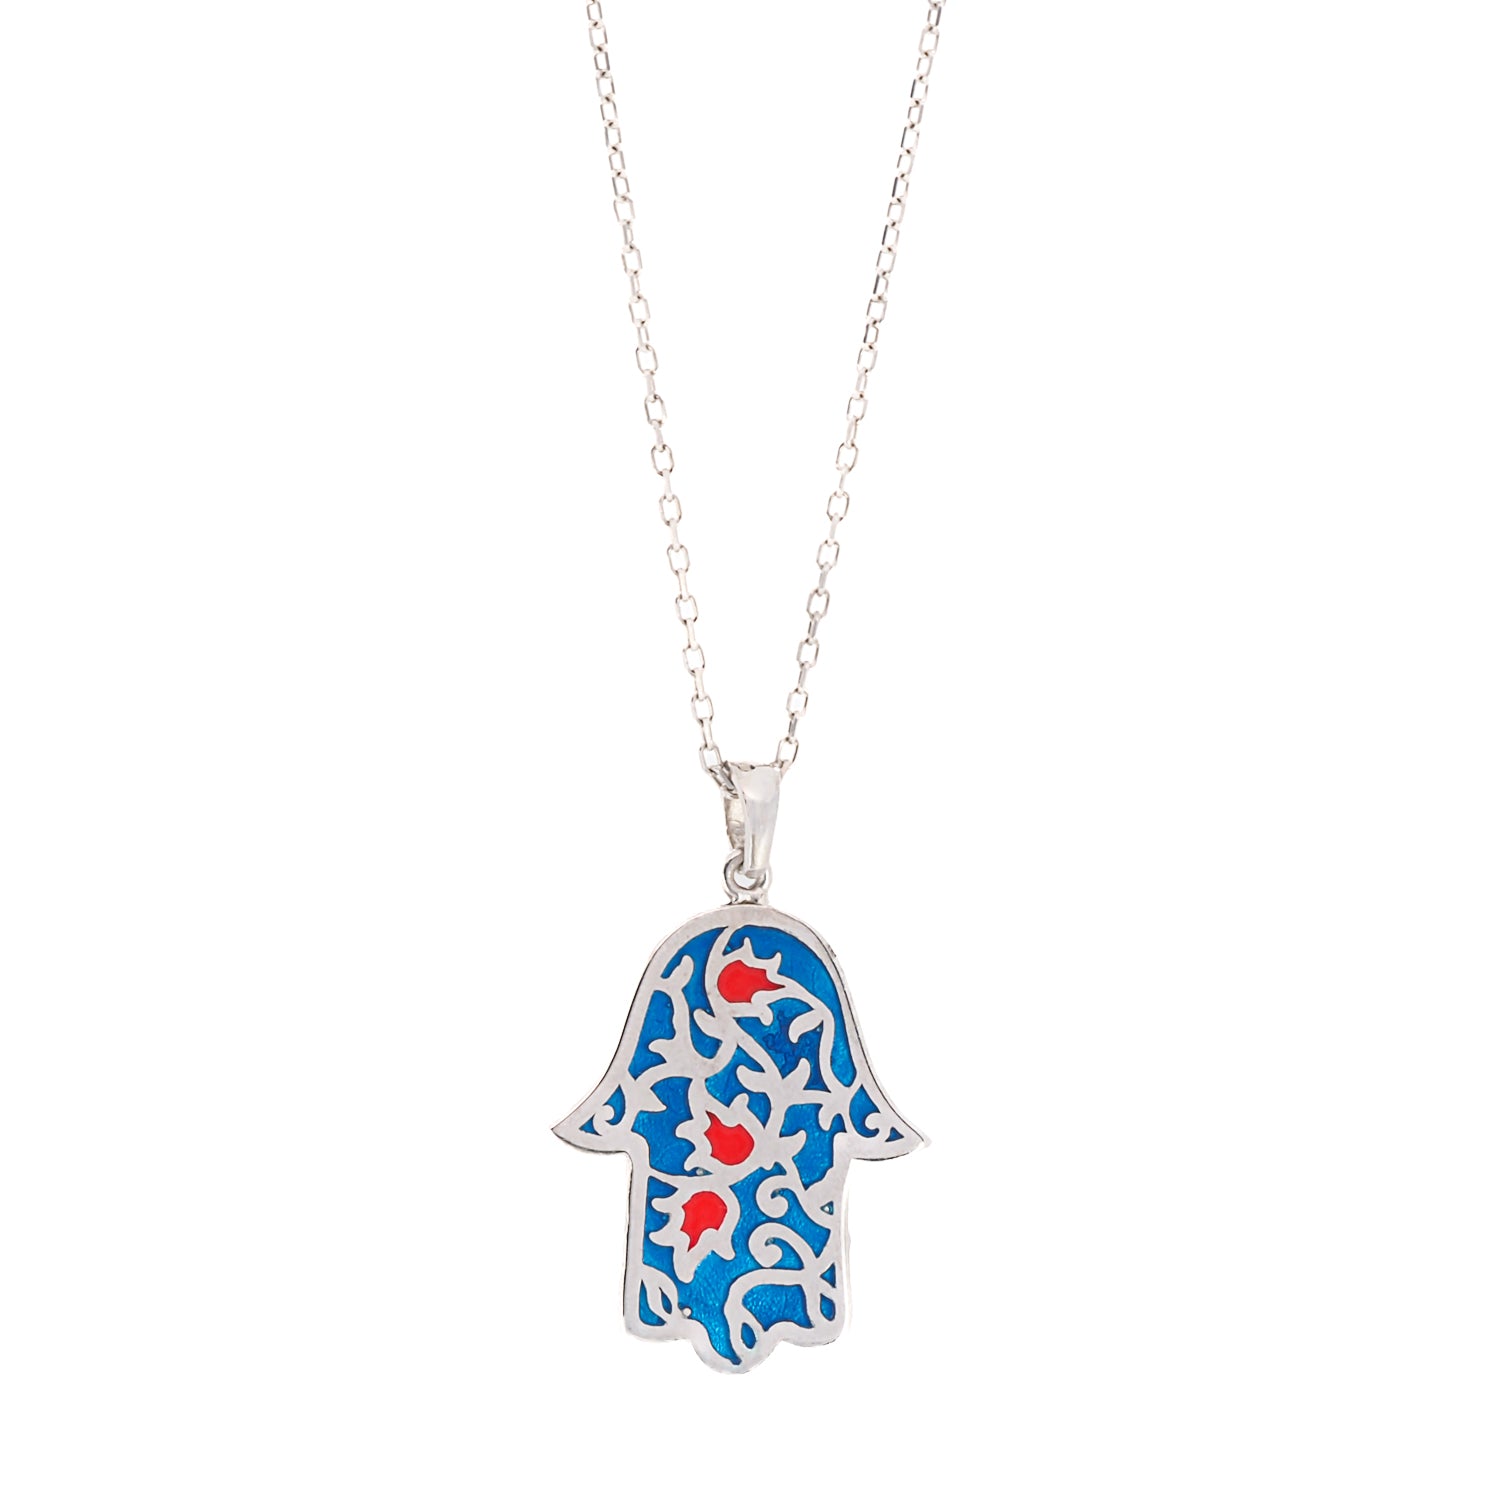 The Good Vibes Enamel Hamsa Necklace Silver, a captivating blend of spirituality and positive energy.